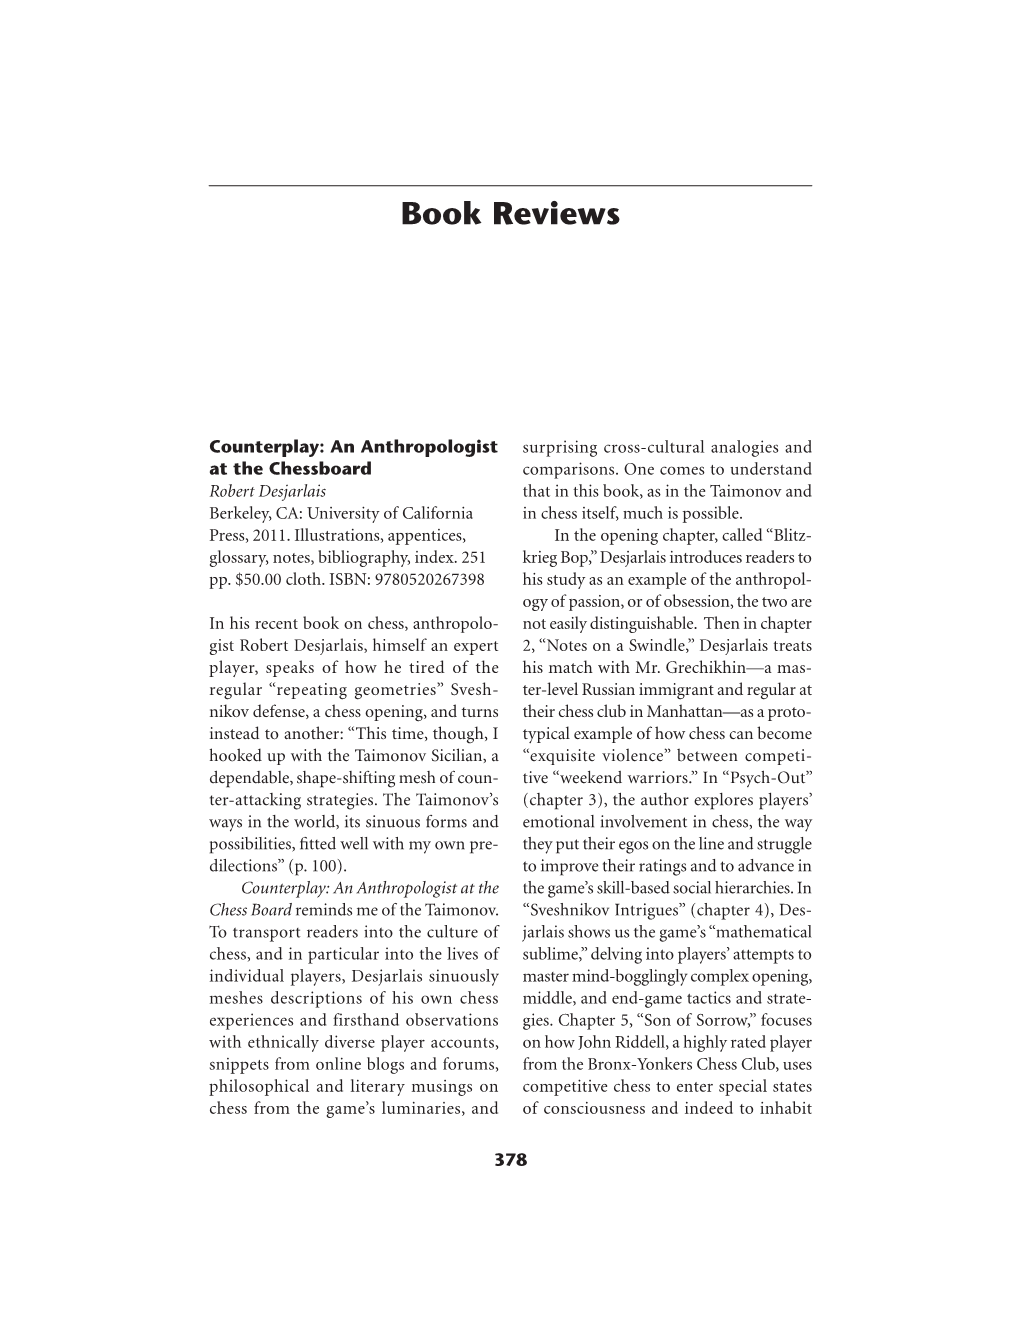 American Journal of Play, Volume 4, Number 3 Book Review 1